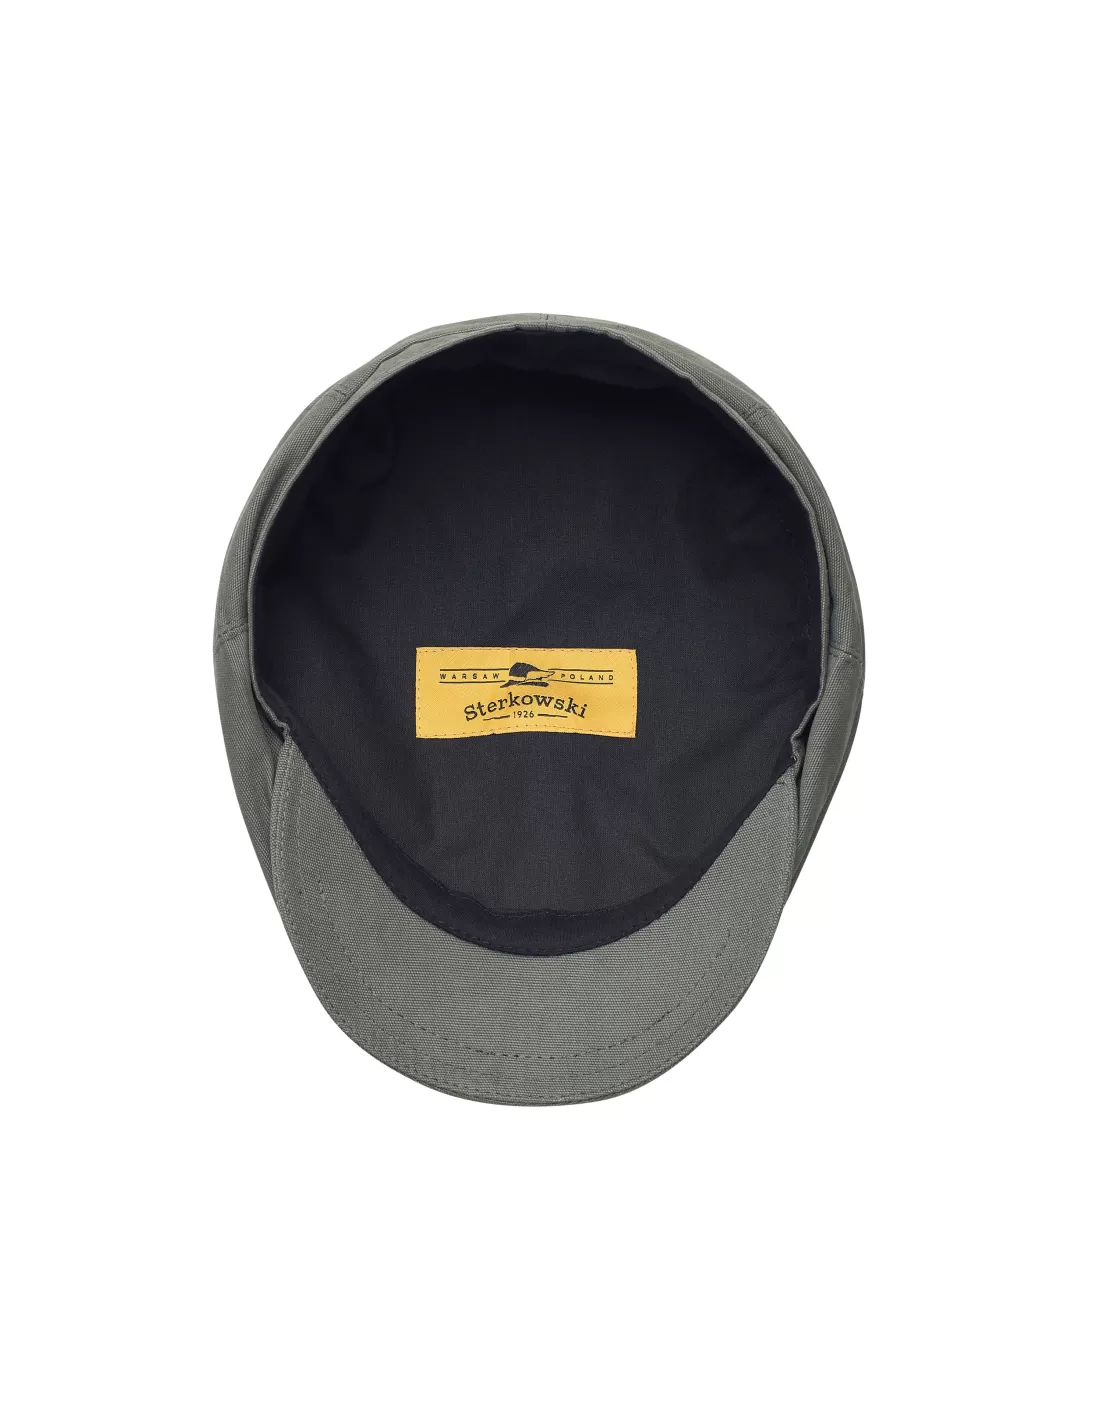 Shelby - vintage mens cap cotton, inspired by the Peaky Blinders gang ...